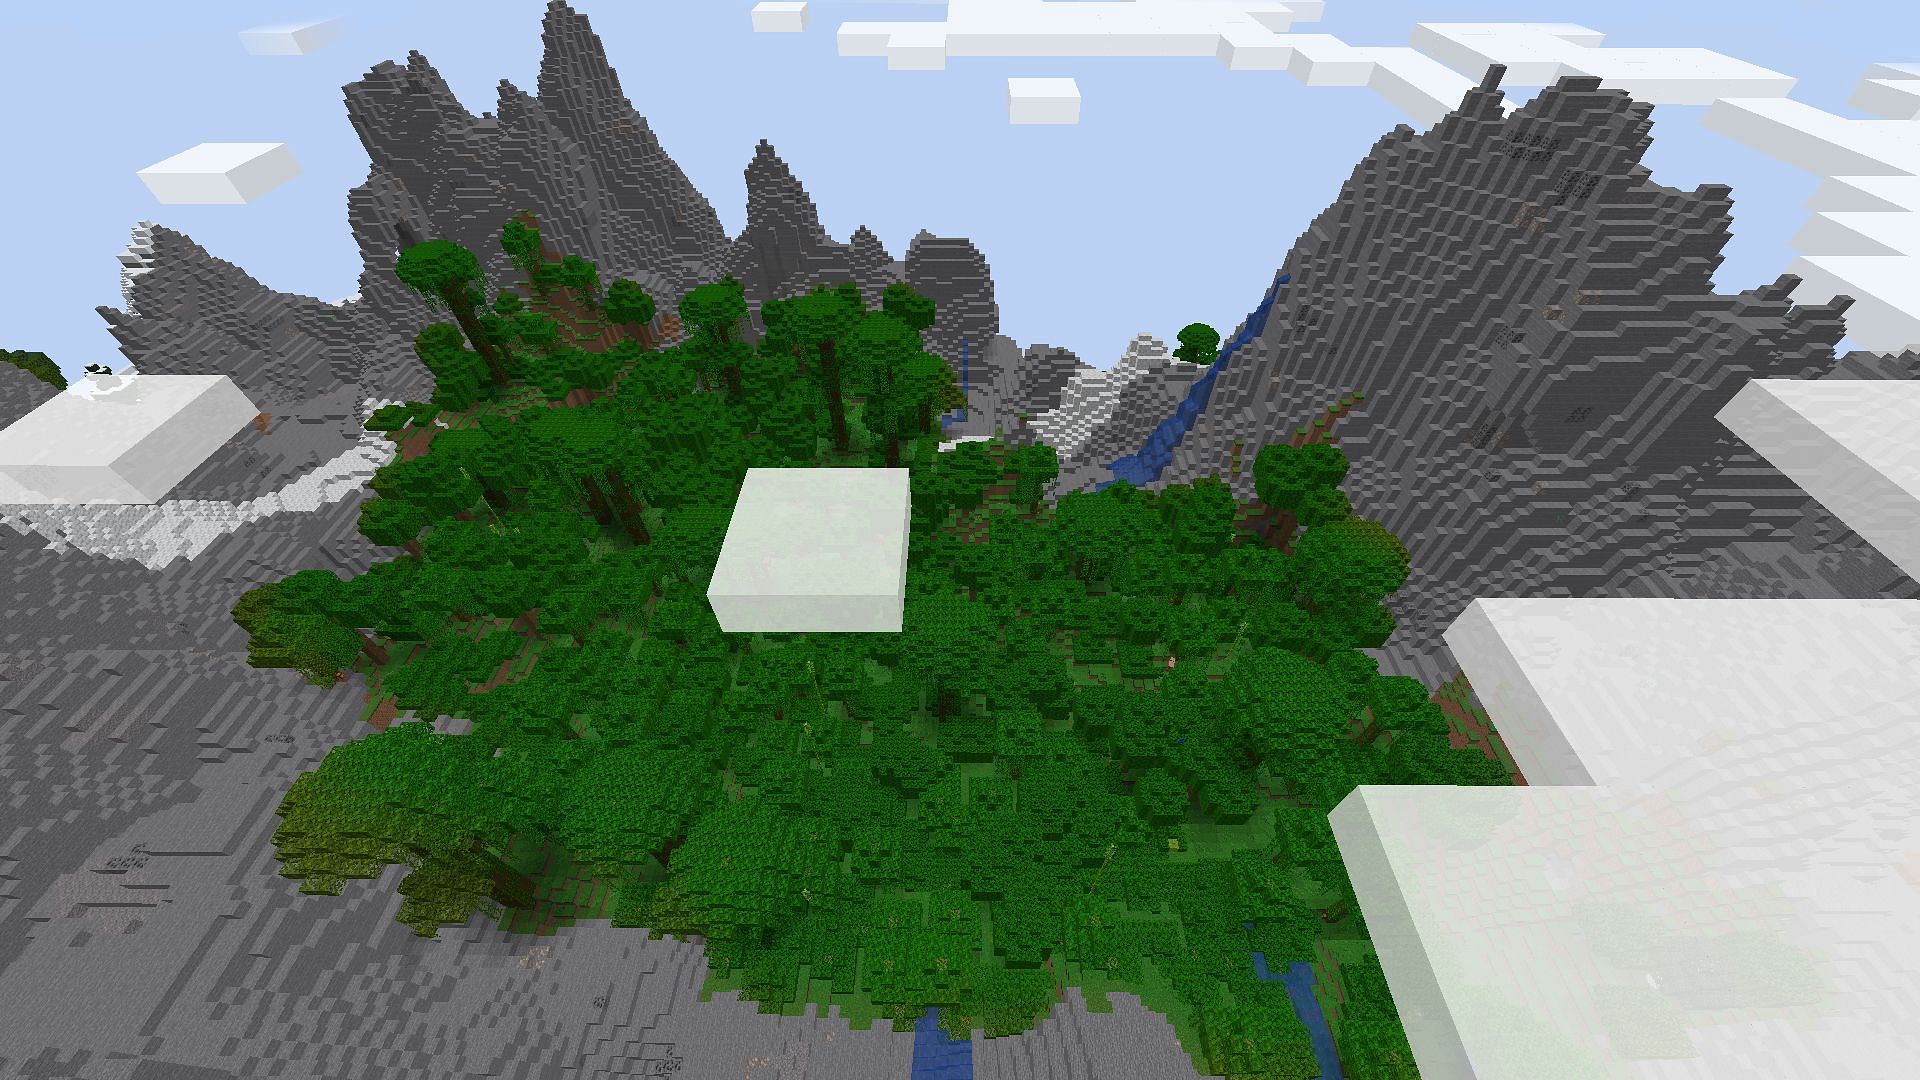 The jungle crater gamers spawn in (Image via Minecraft)